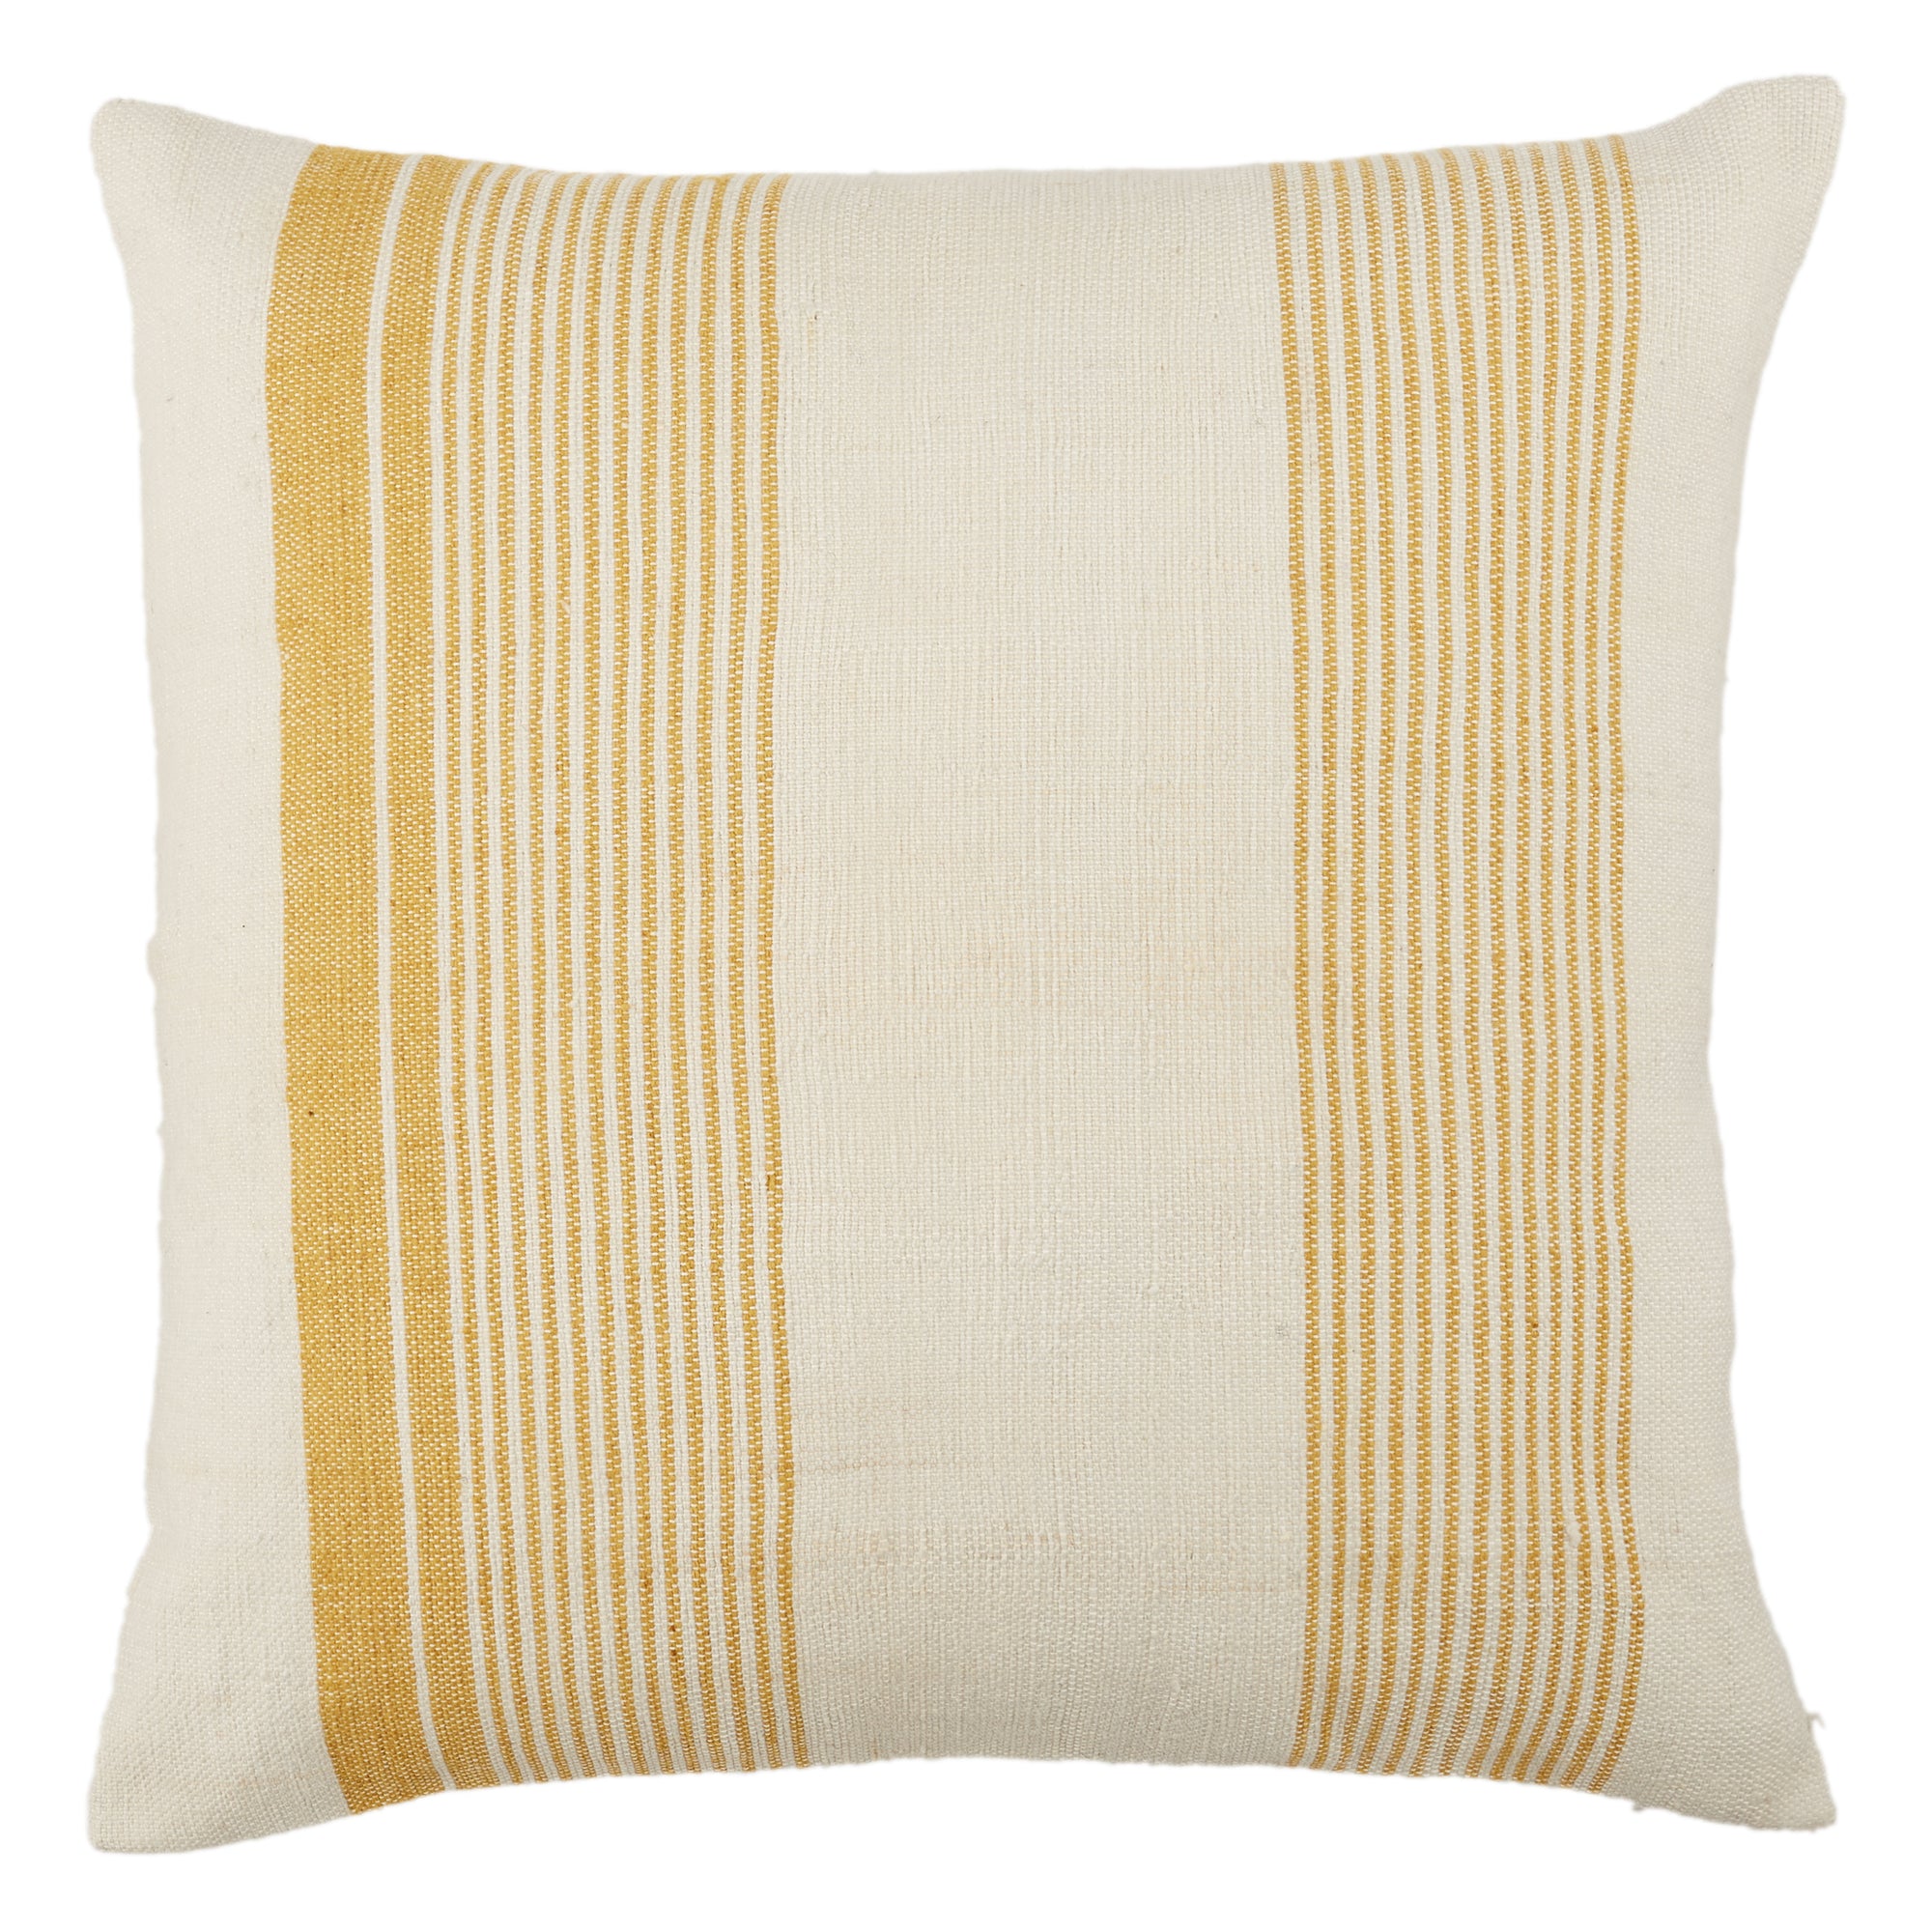 Jaipur Living Parque Outdoor Gold Ivory Striped Poly Fill Pillow